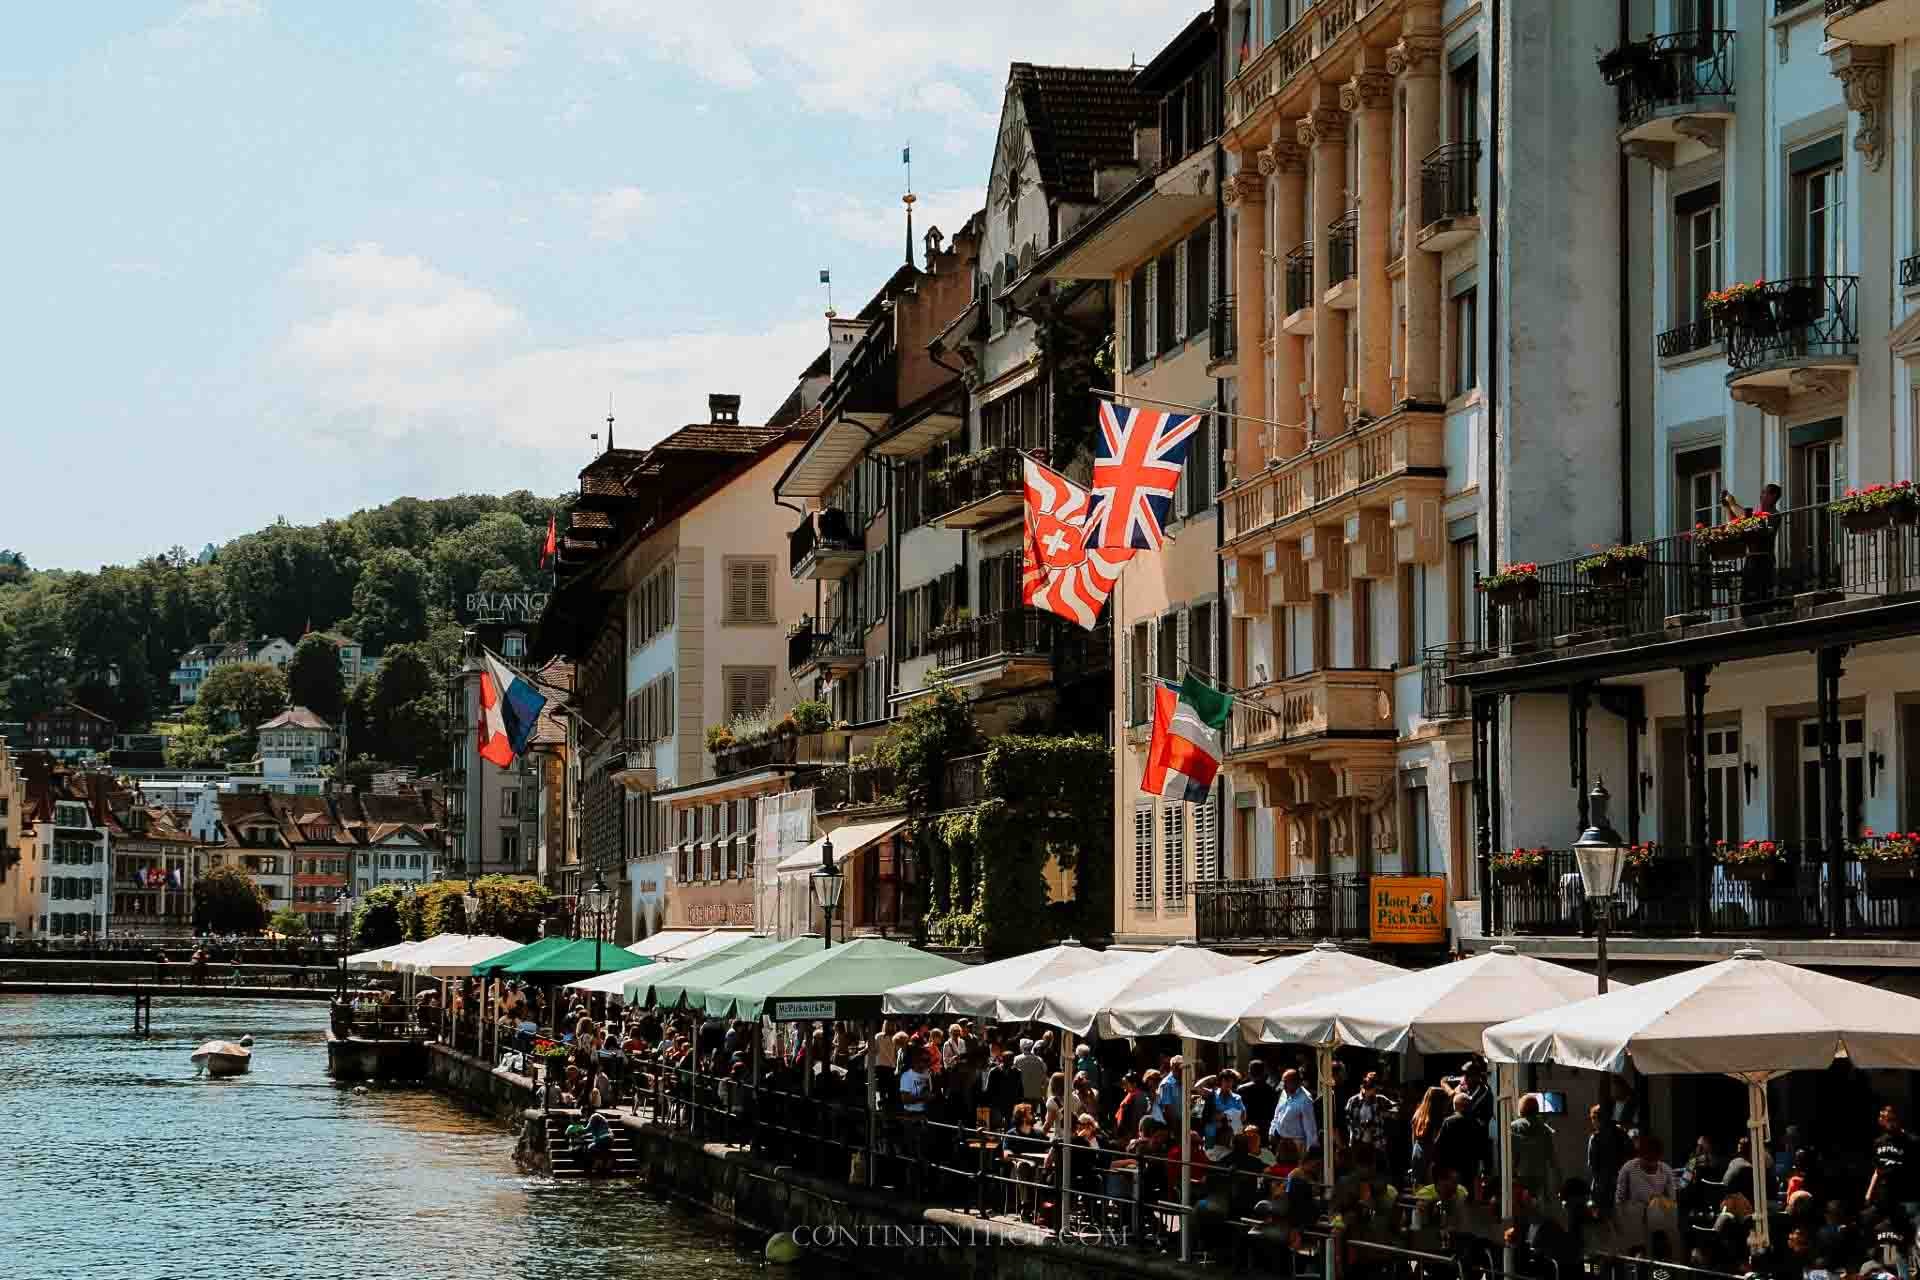 The waterfront in Lucerne on how many days in Lucerne